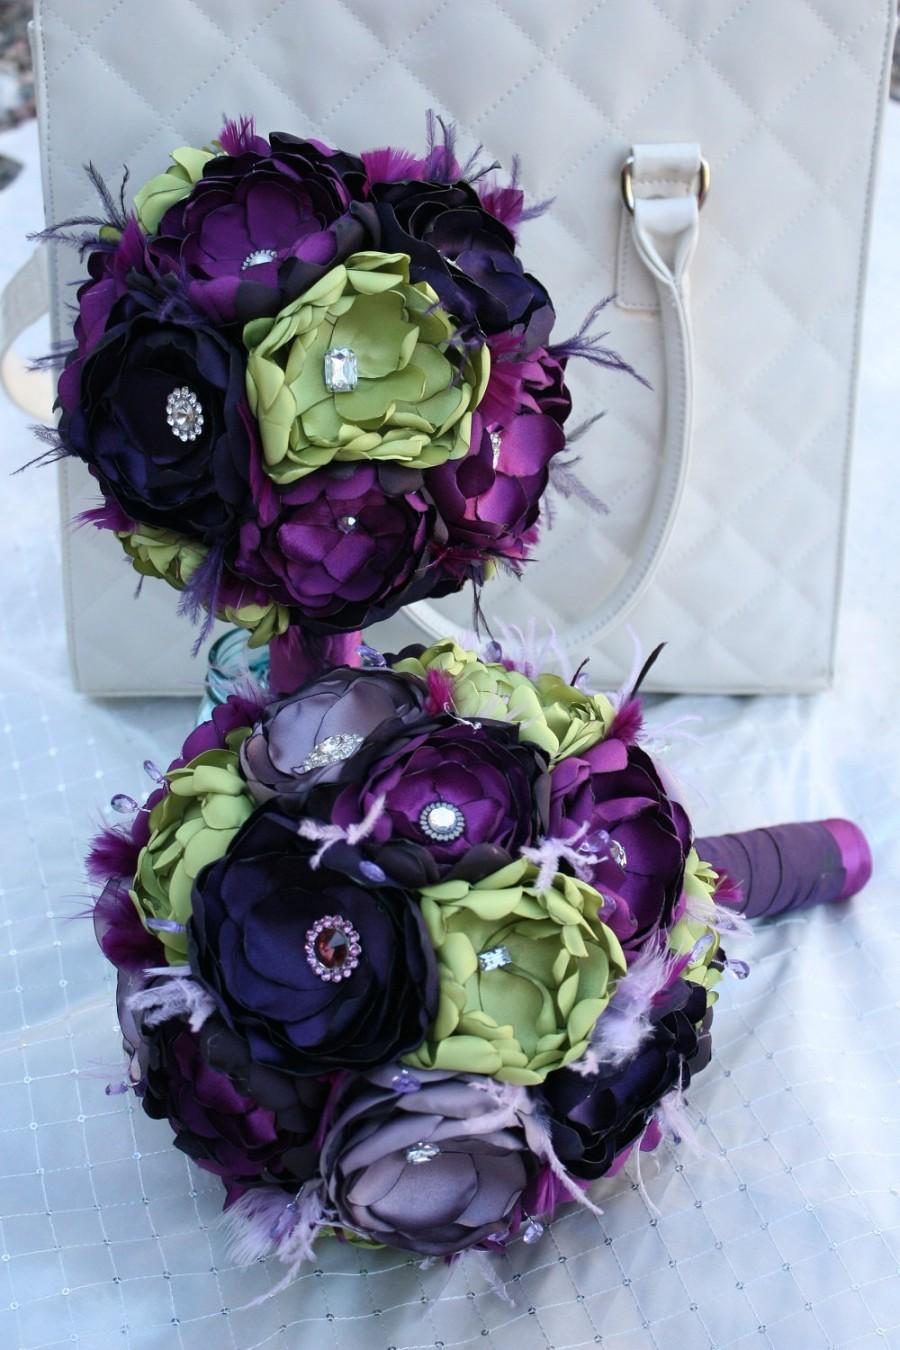 Mariage - Handmade Fabric Flower Wedding Package in Purples and Green - Bridal bouquet - Boutonnieres - Corsages - Brooch bouquet -